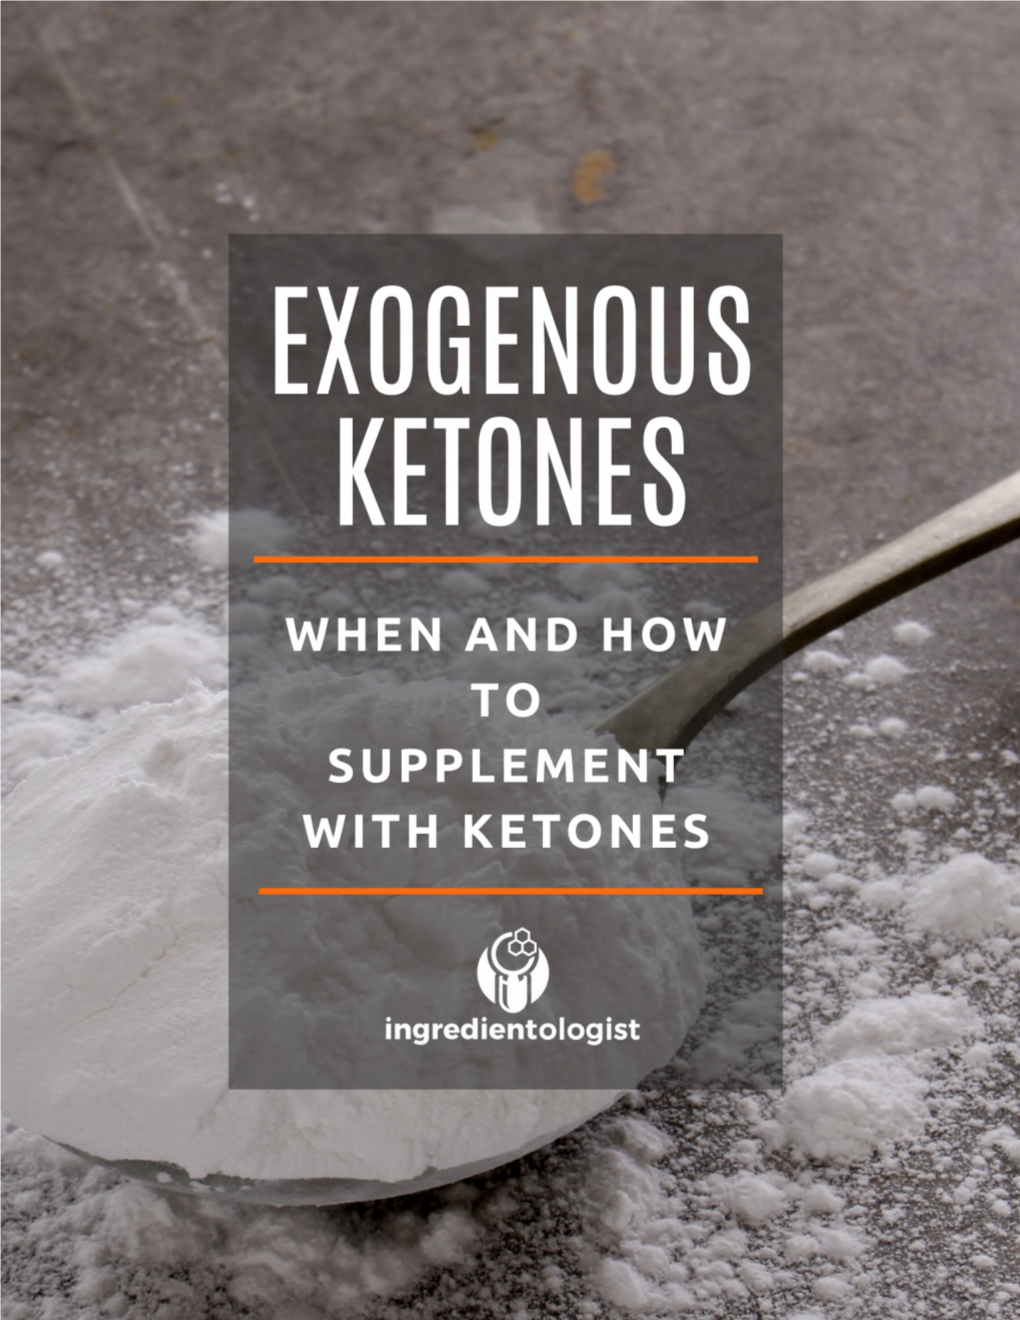 EXOGENOUS KETONES When and How to Supplement with Ketones